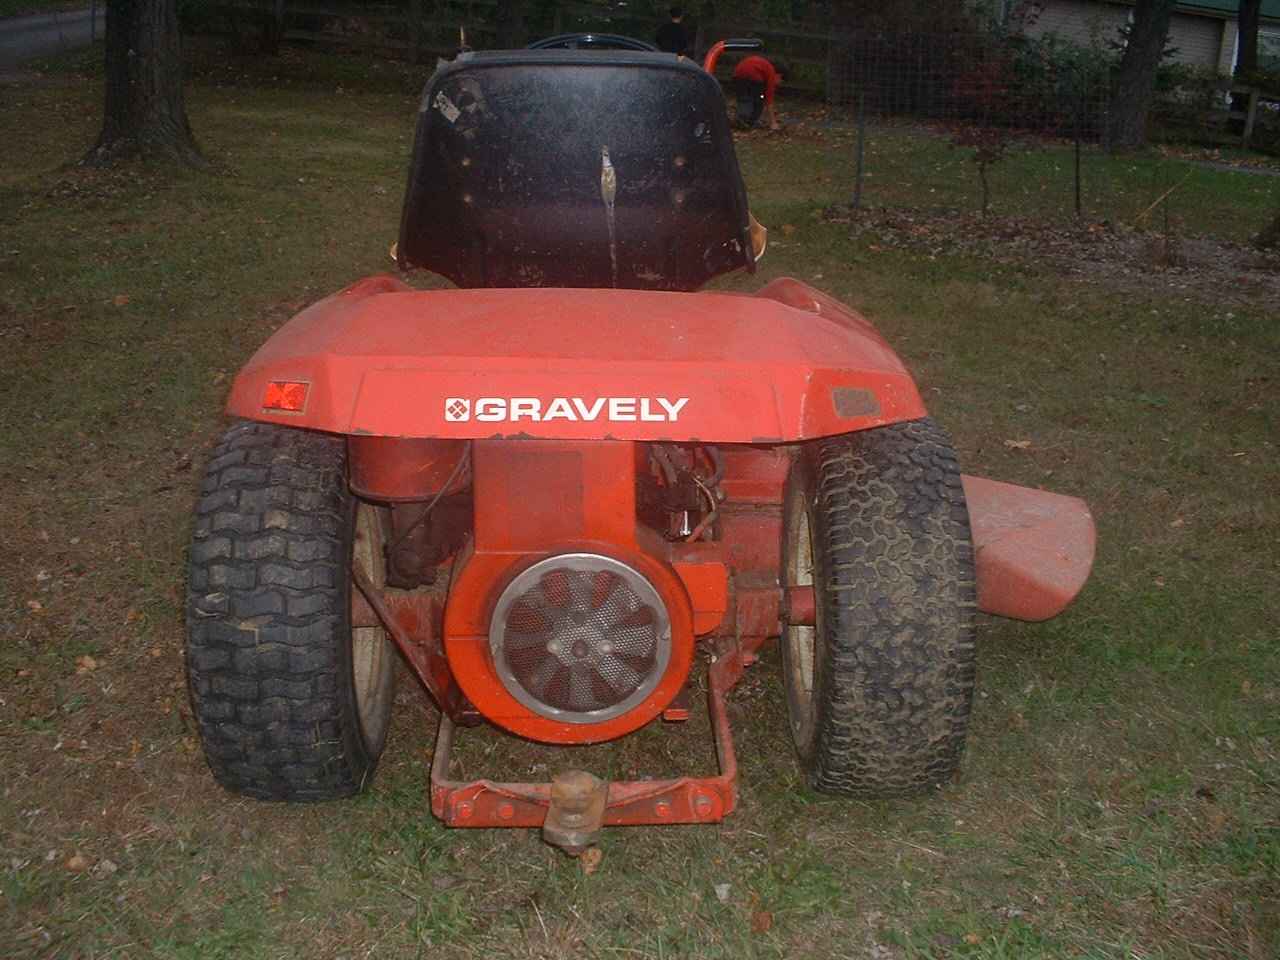 This Tractor has been sold.